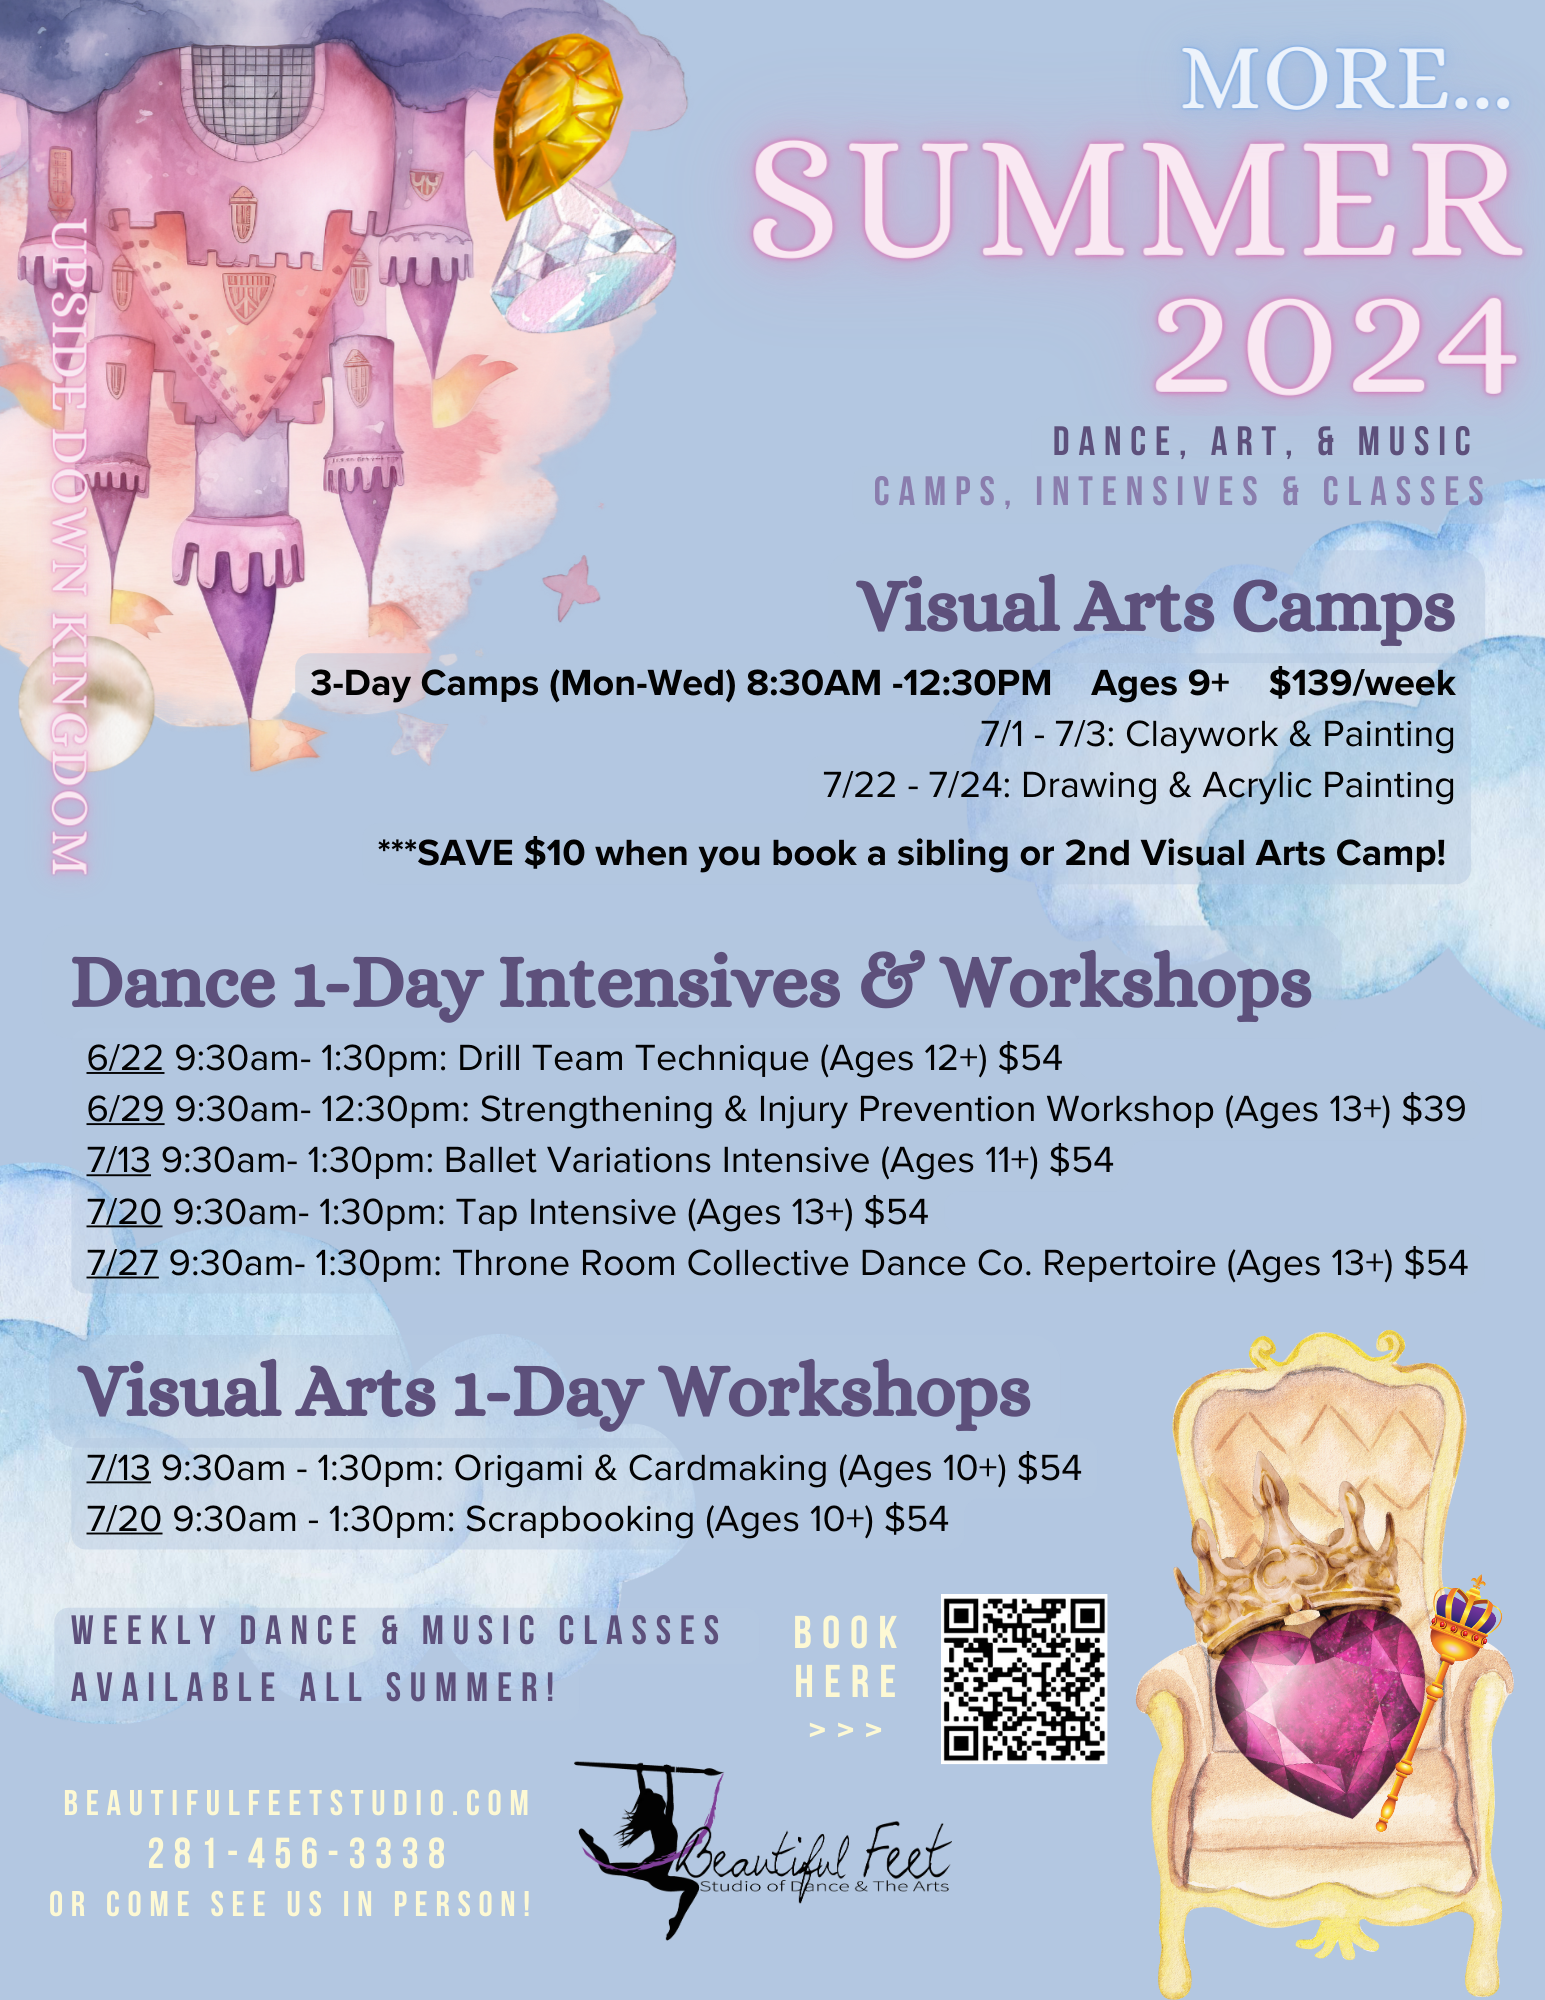 Visual Arts 1-Day Workshops – Origami & Cardmaking (Ages 10+)